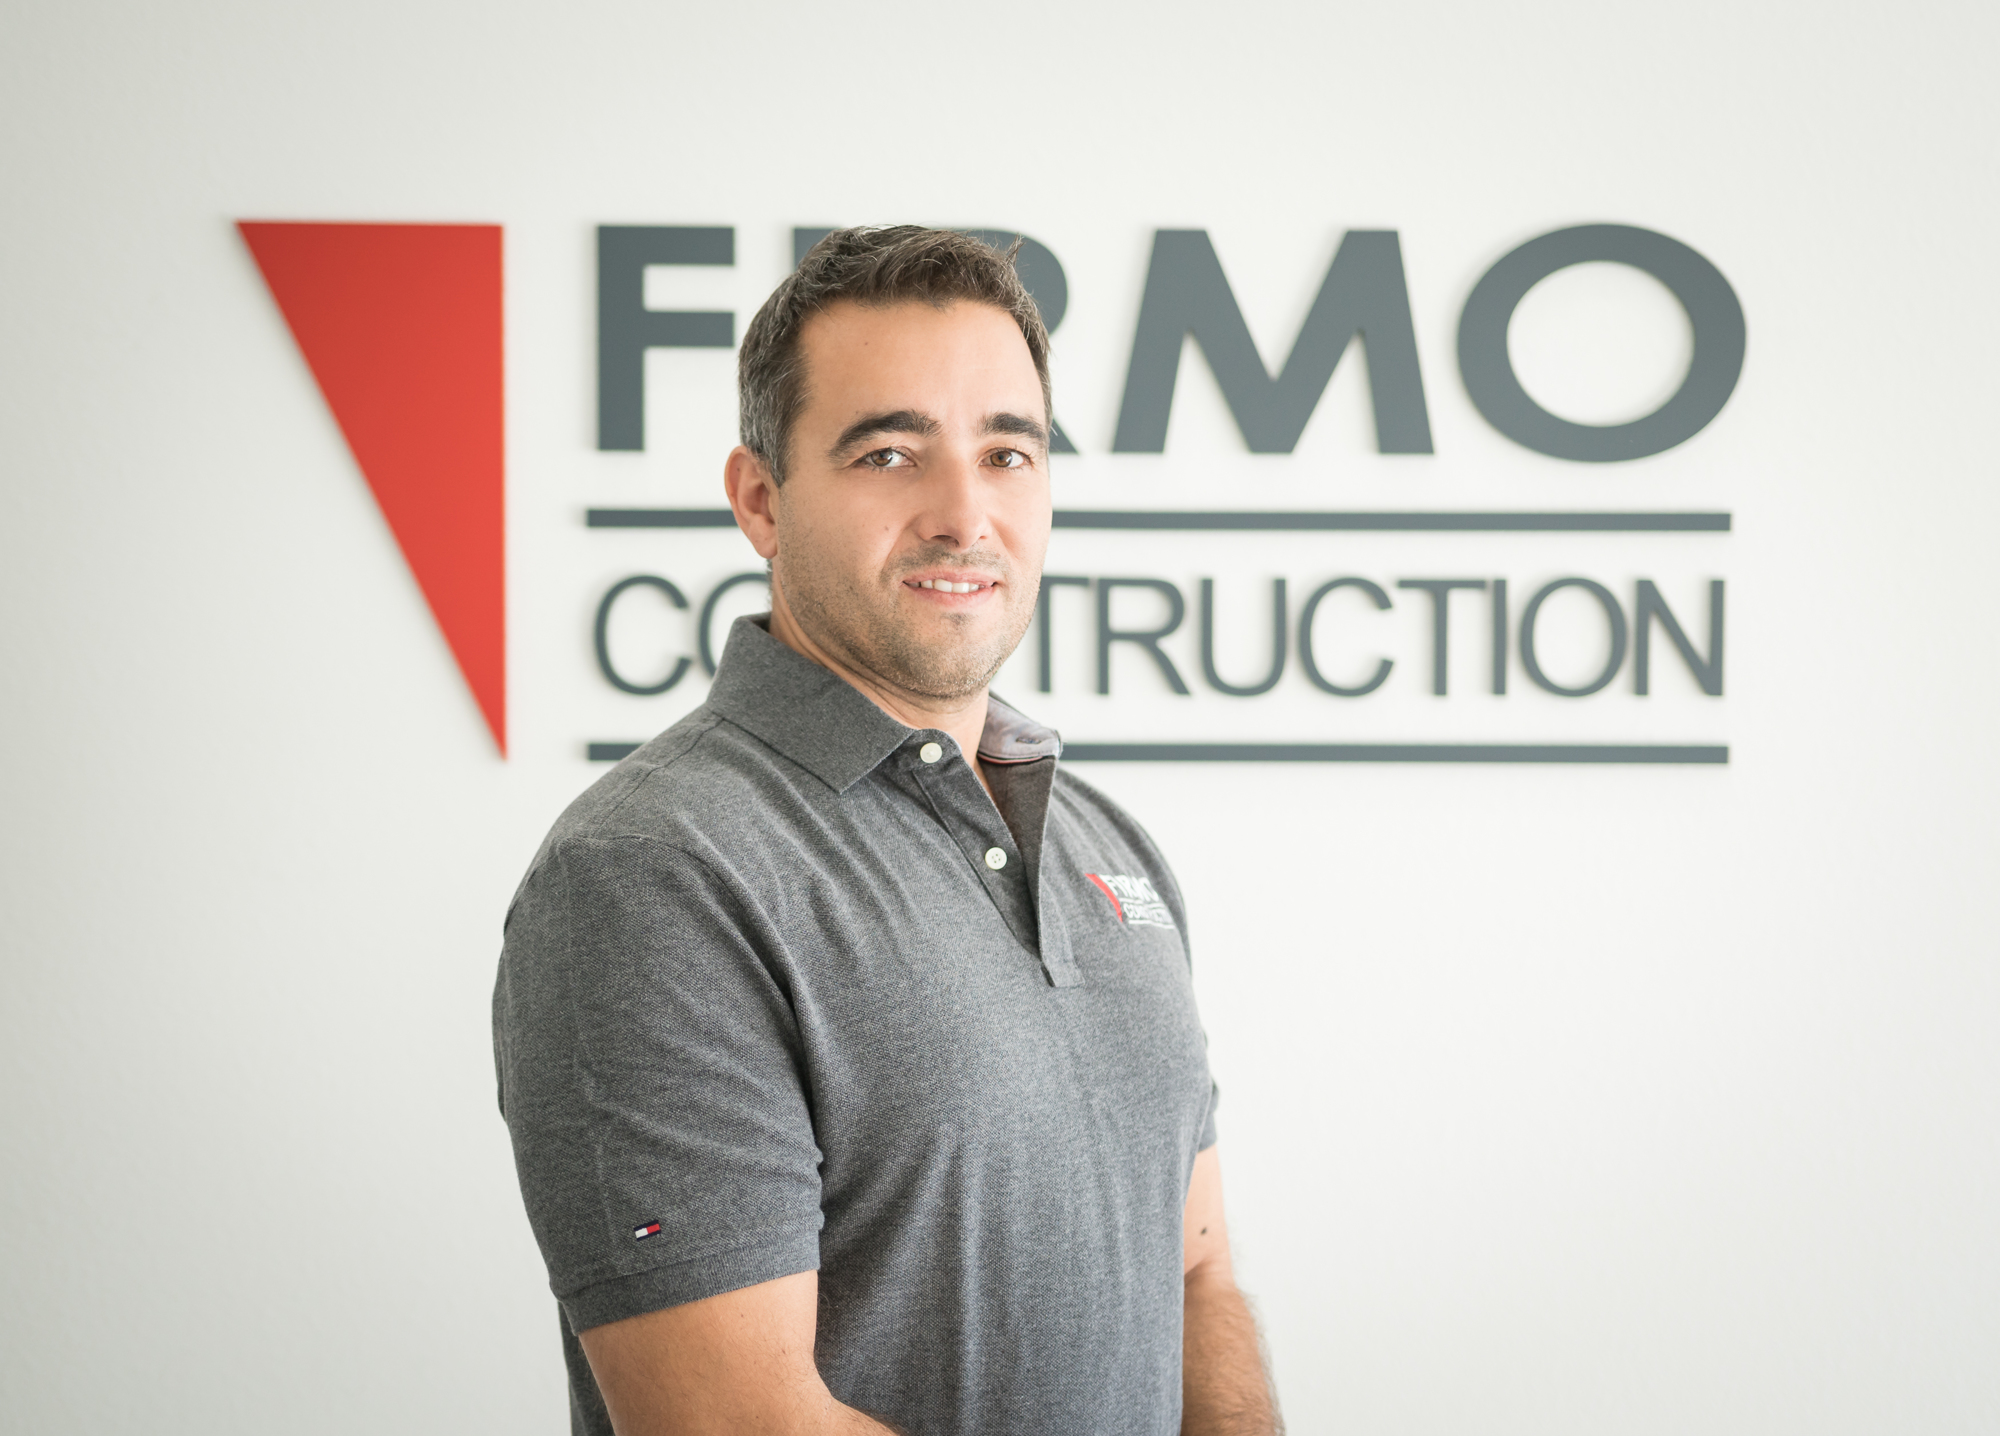 Courtesy. Construction management firm Firmo Construction has added a new superintendent, Andor Keresztes.